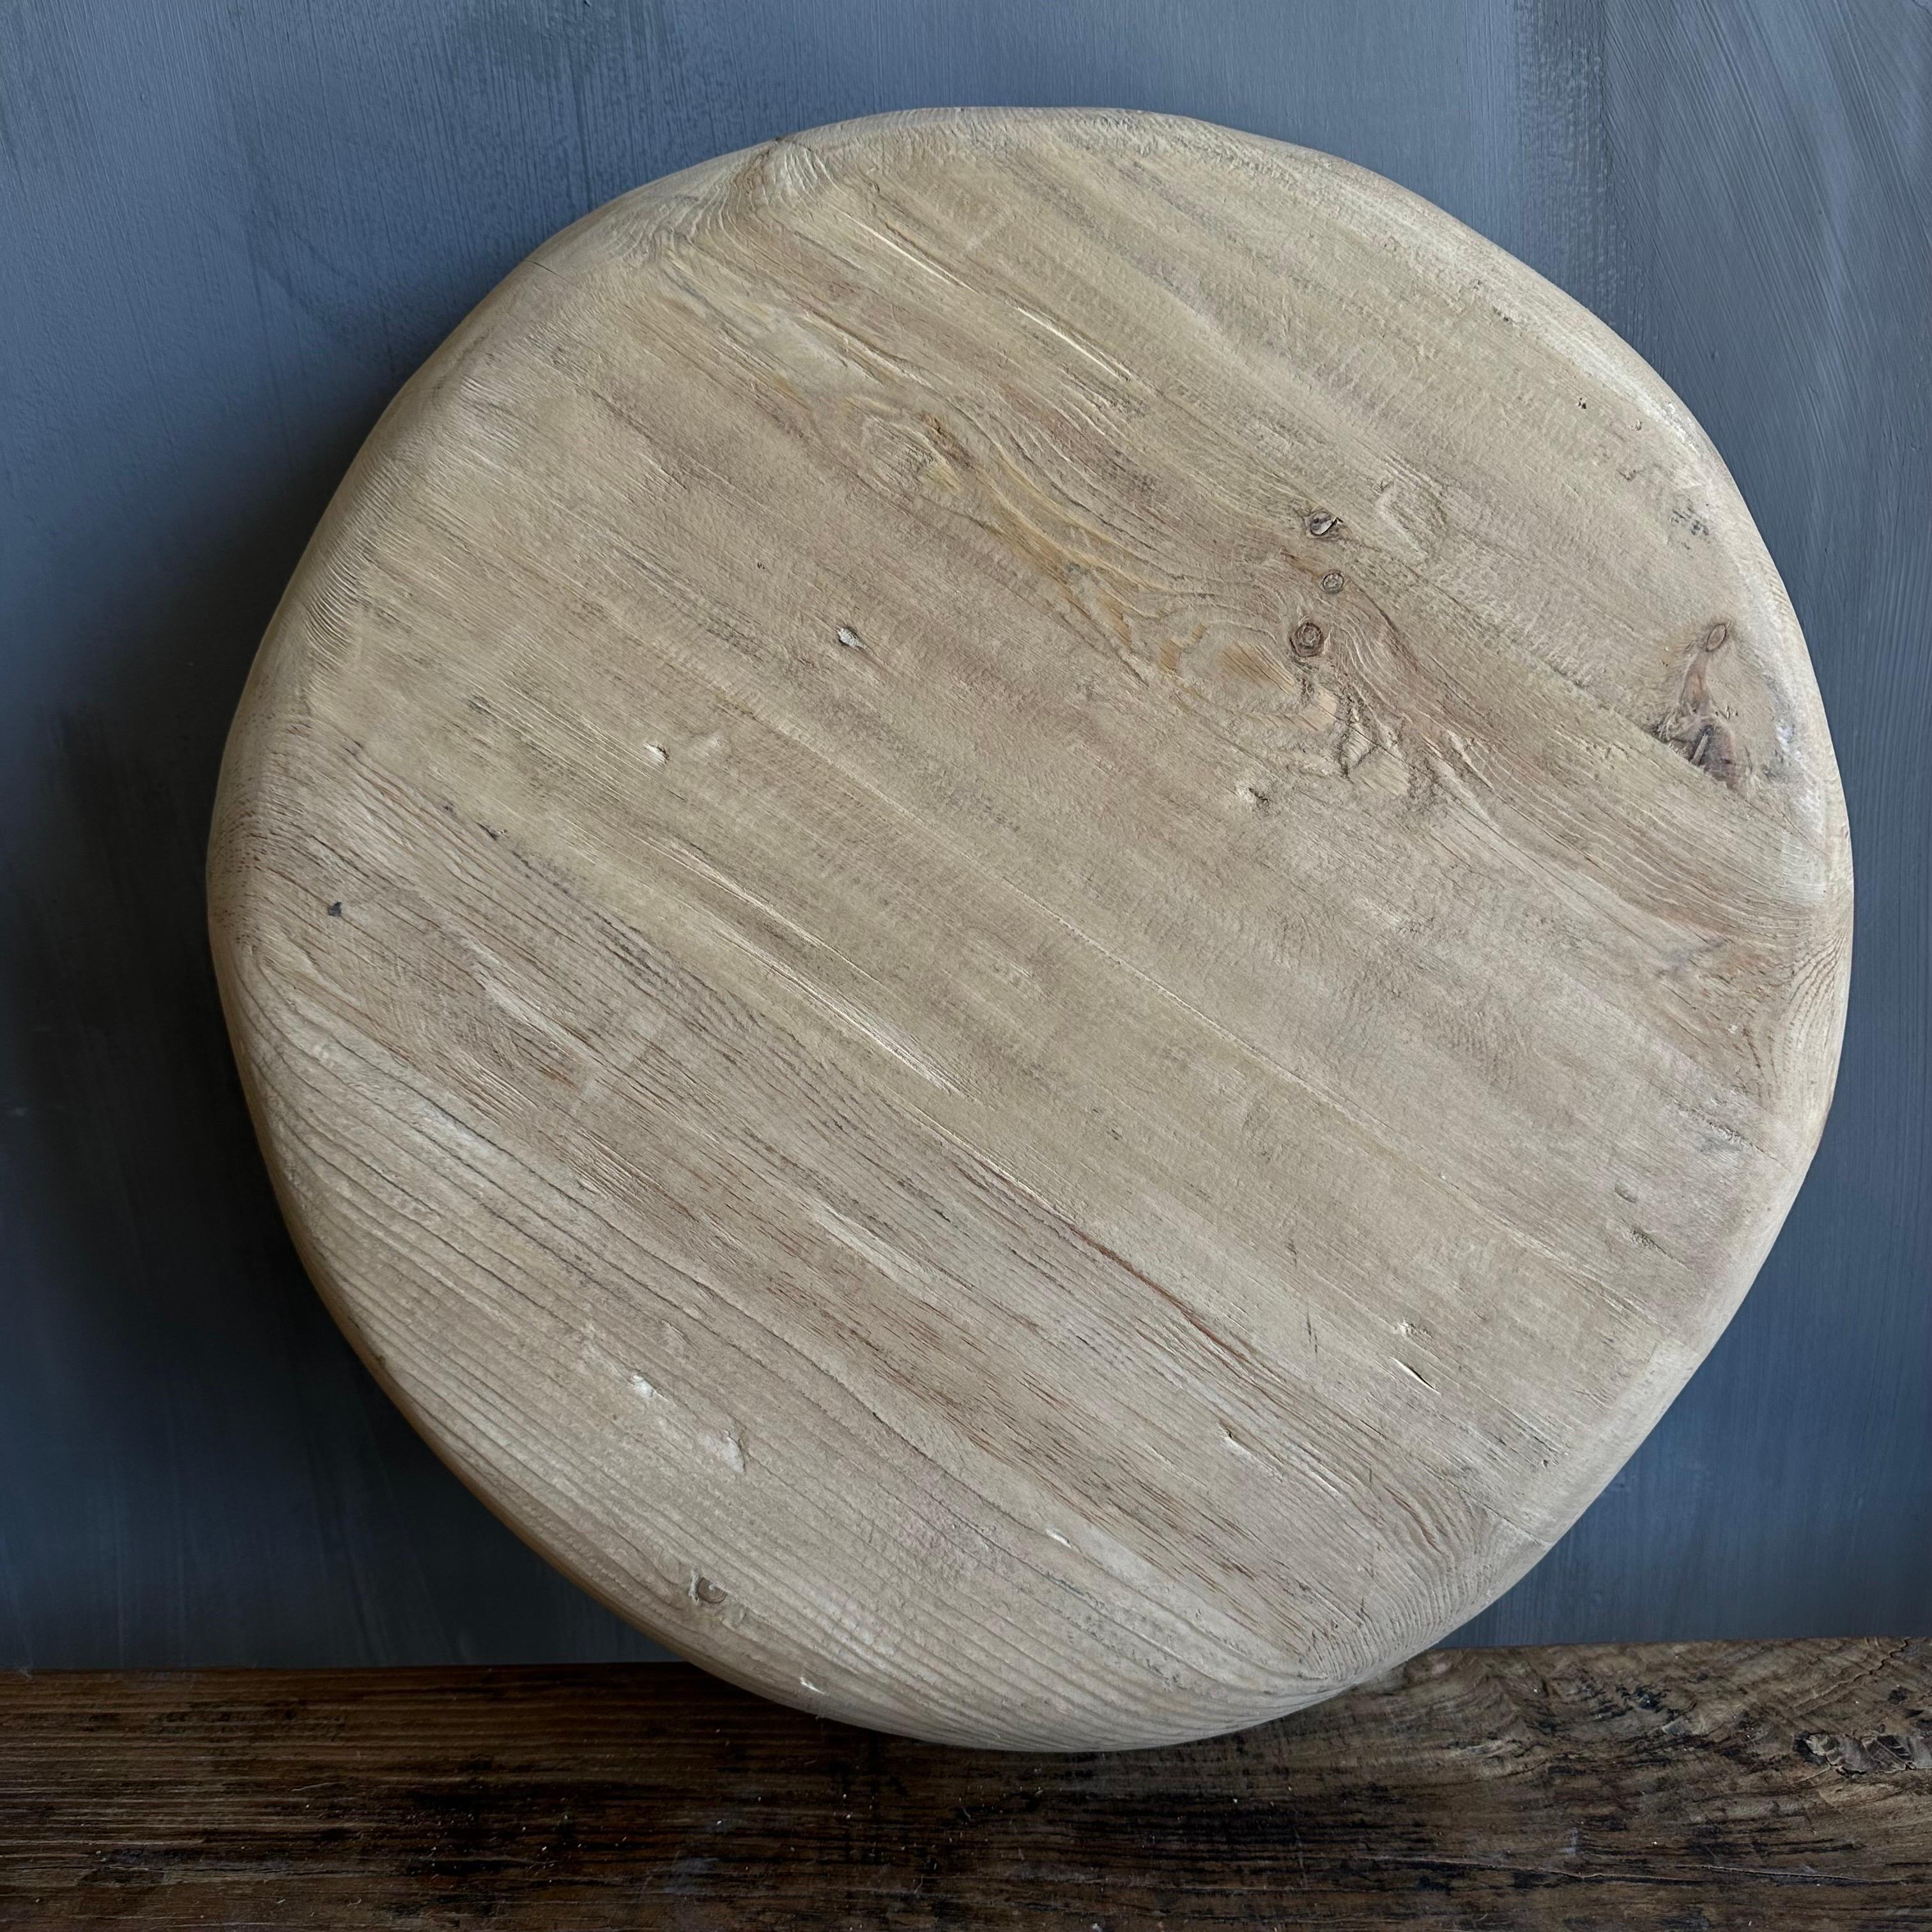 Decorative Wood Bowl
These beautiful organic wood bowls add a natural element to your home.
Use on a counter for fruit, or as an art piece to display.  Use to display your favorite succulents, or stand upright against a backsplash for display. 
Made